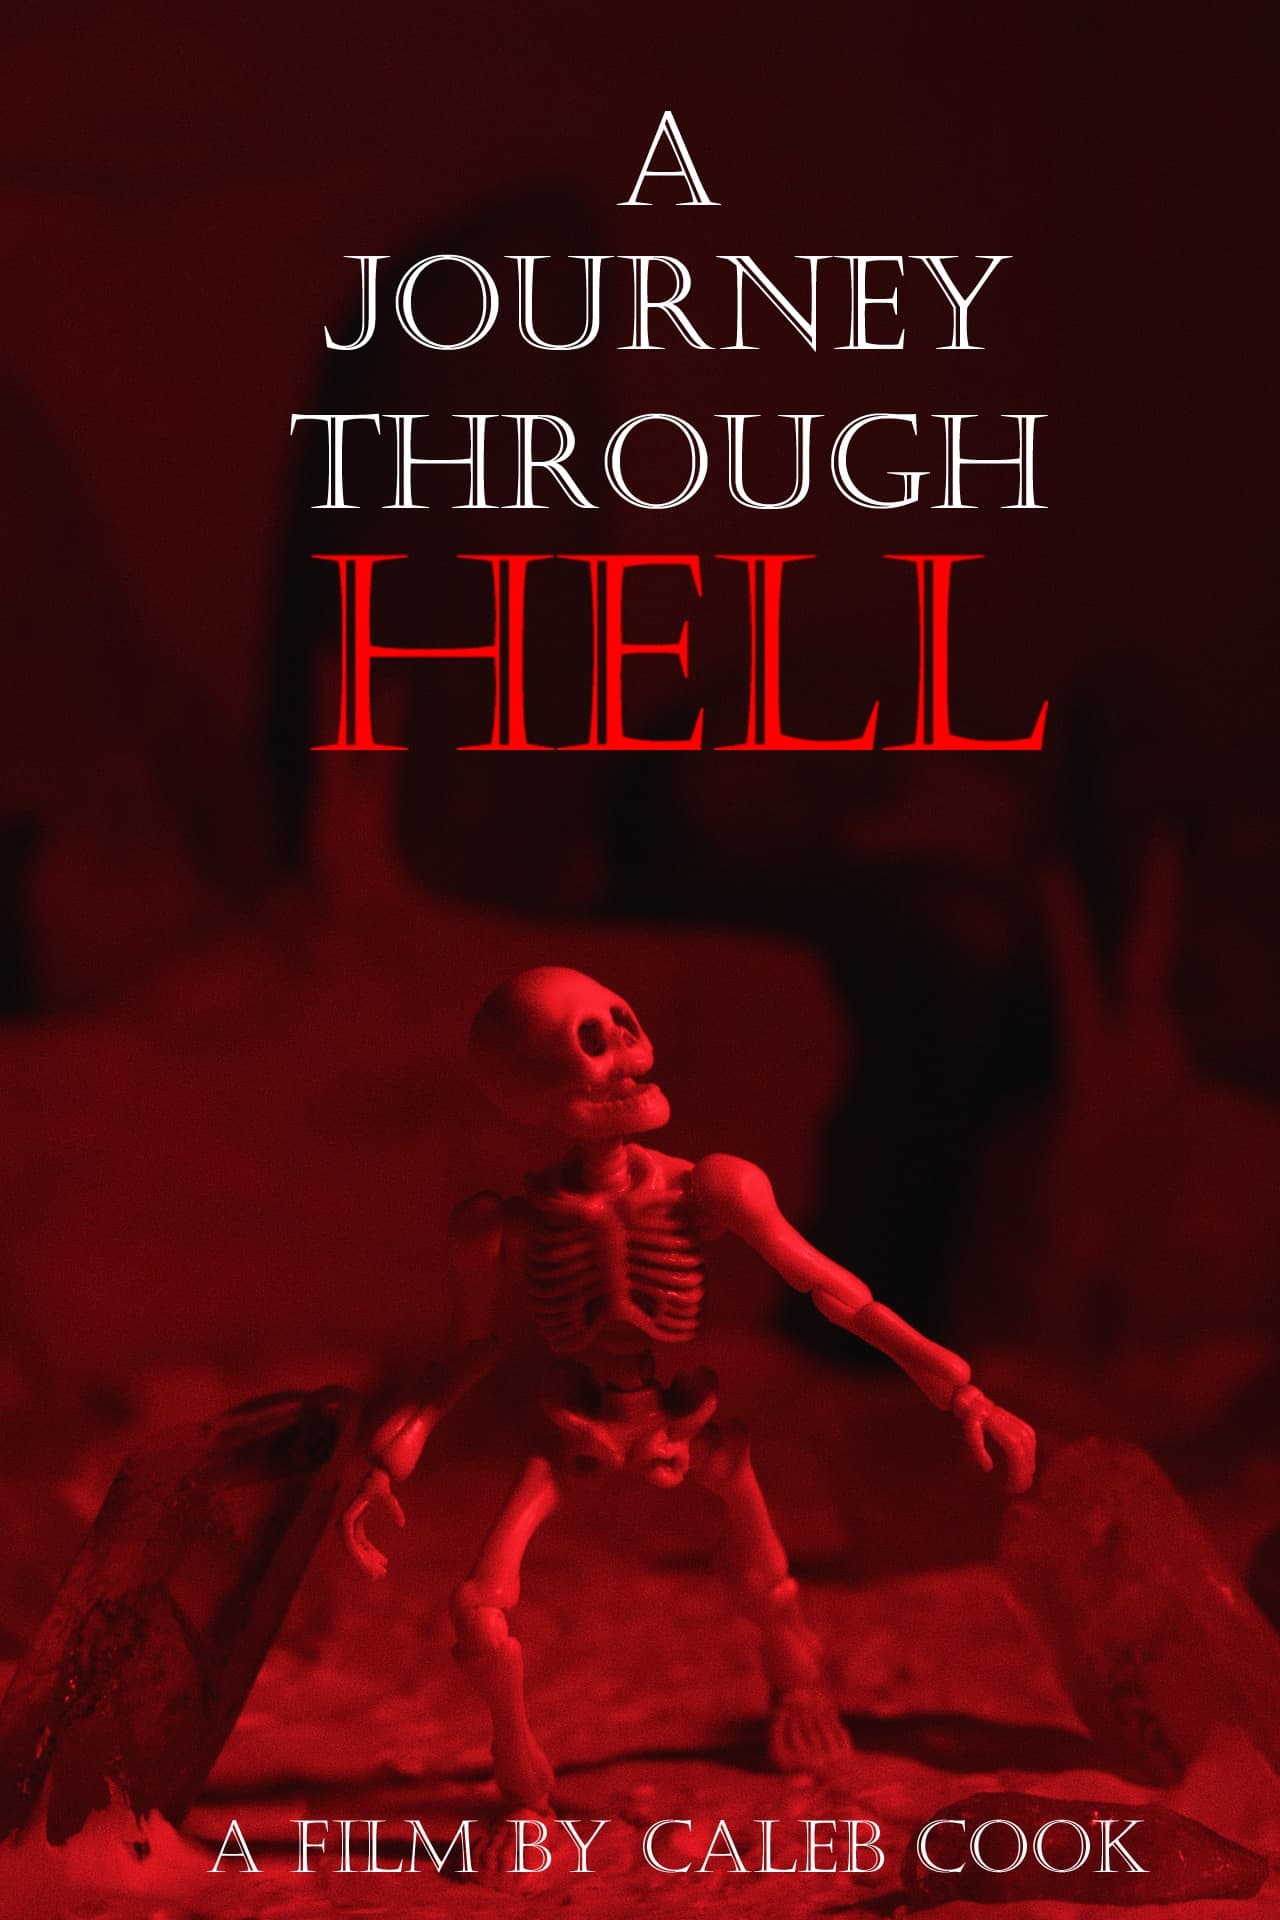 A Journey Through Hell